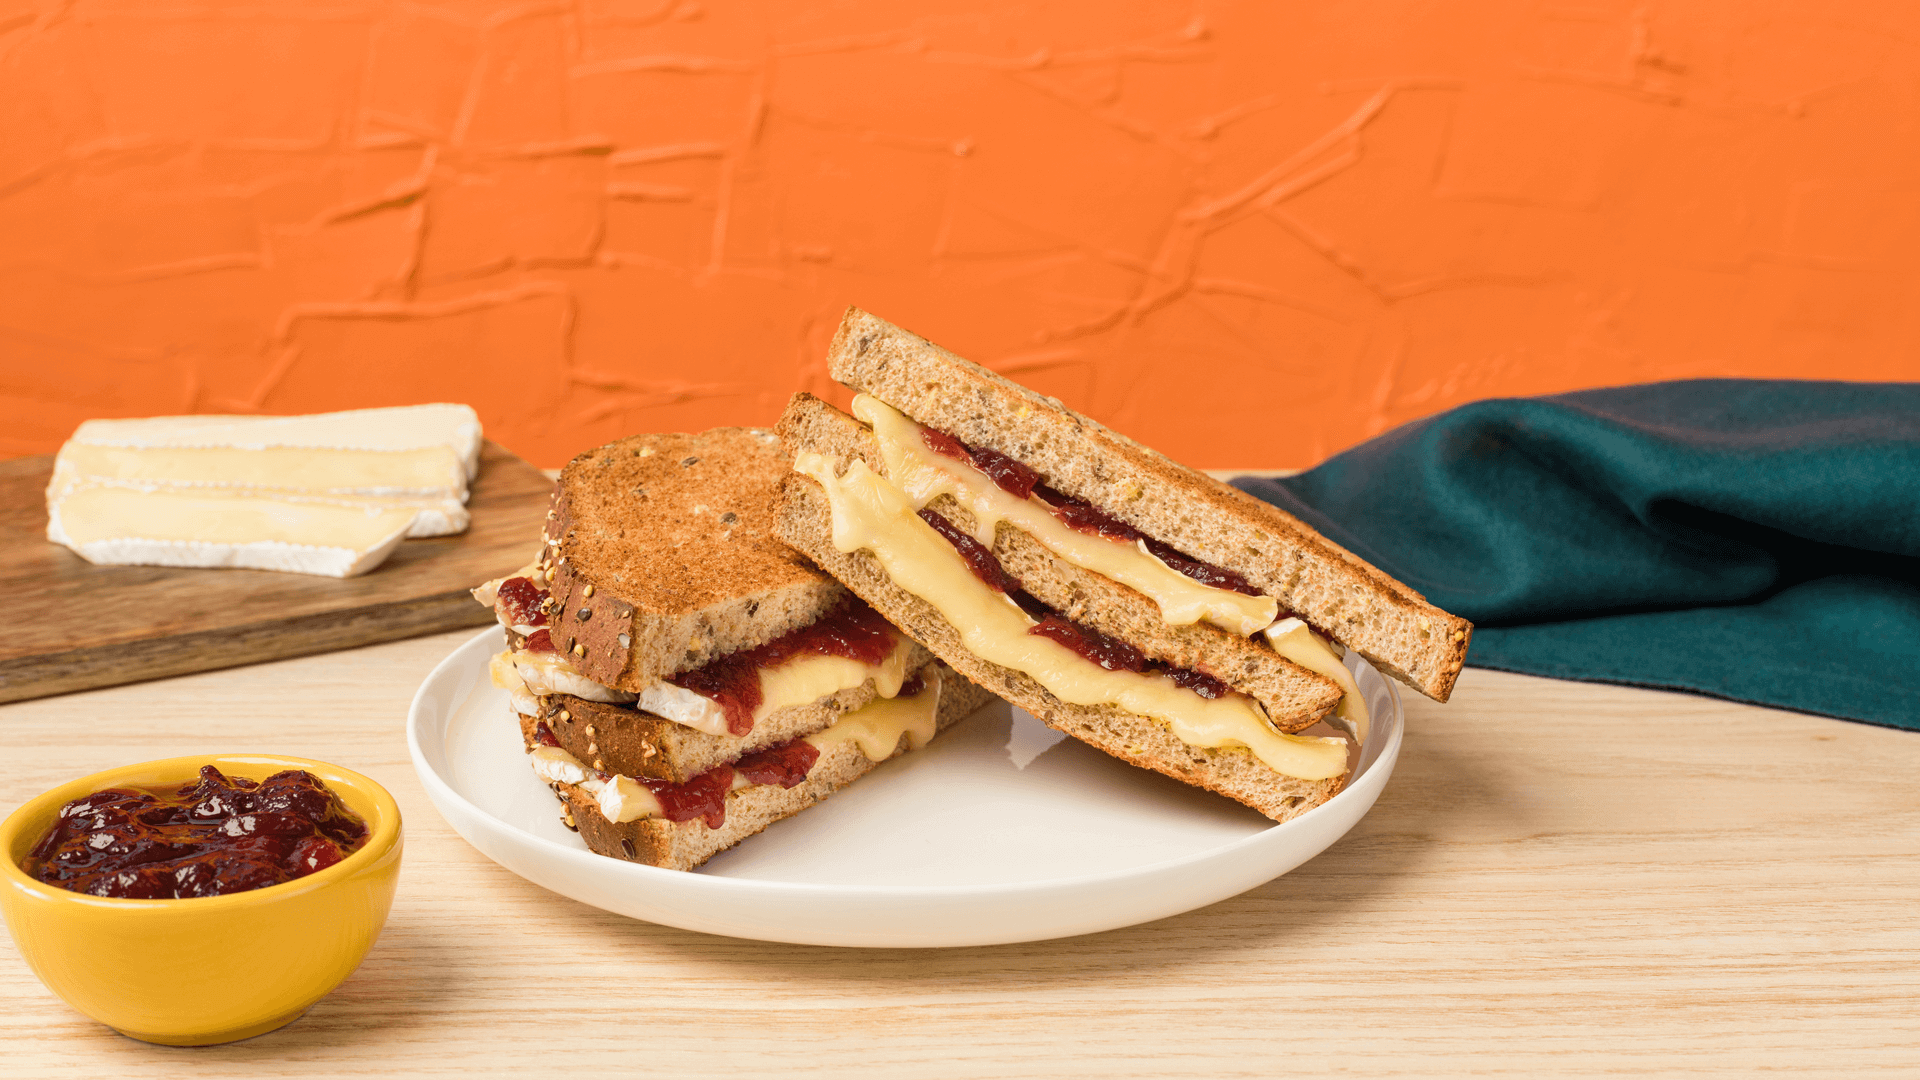 Cranberry Brie Grilled Cheese Sandwich